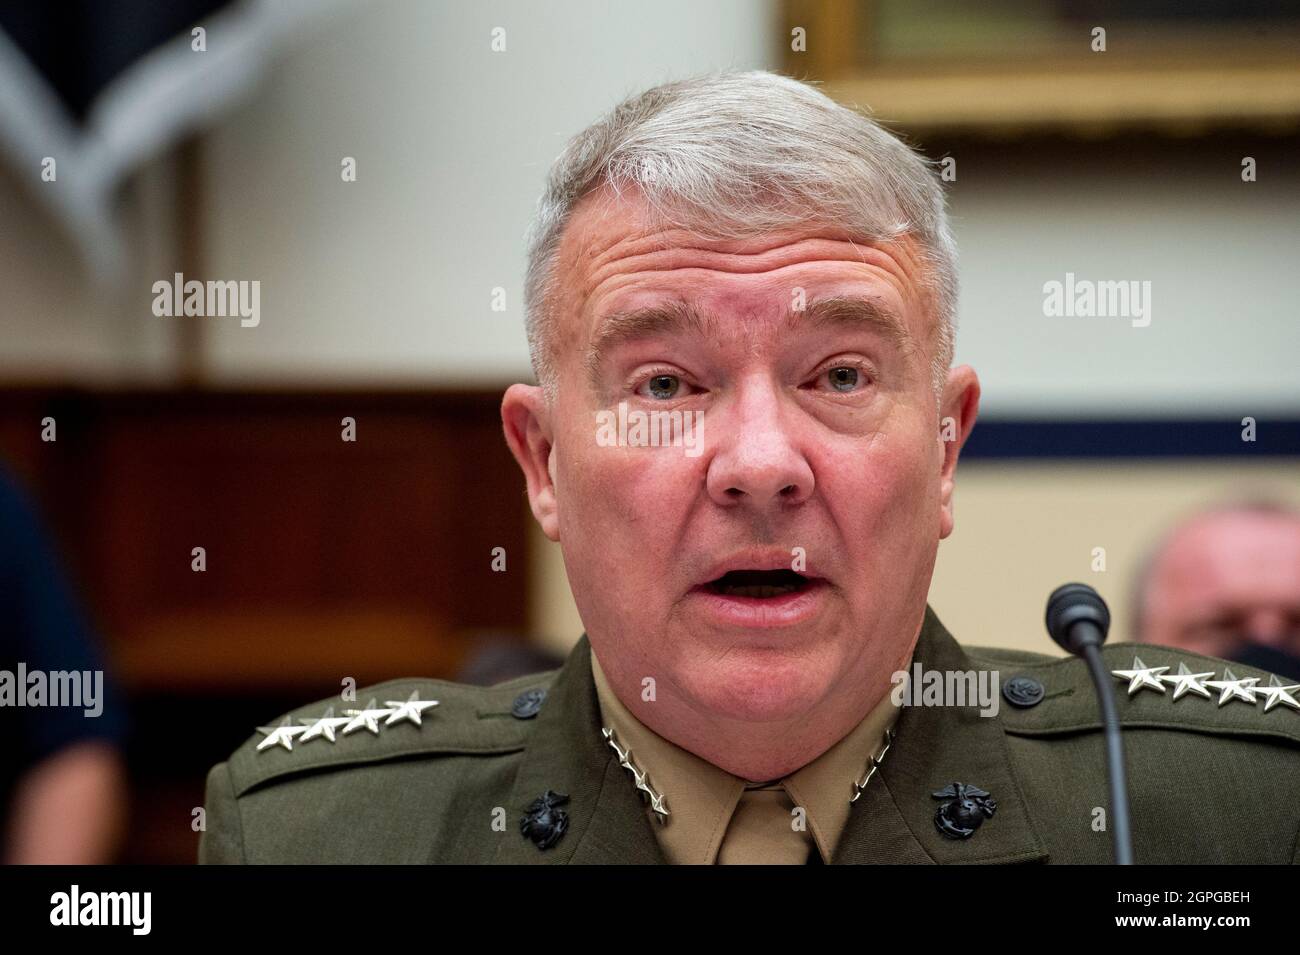 Washington, USA. 29th Sep, 2021. General Kenneth McKenzie Jr., USMC Commander, U.S. Central Command responds to questions during a House Armed Services Committee hearing on “Ending the U.S. Military Mission in Afghanistan” in the Rayburn House Office Building in Washington, DC, Wednesday, September 29, 2021. (Photo by Rod Lamkey/Pool/Sipa USA) Credit: Sipa USA/Alamy Live News Stock Photo